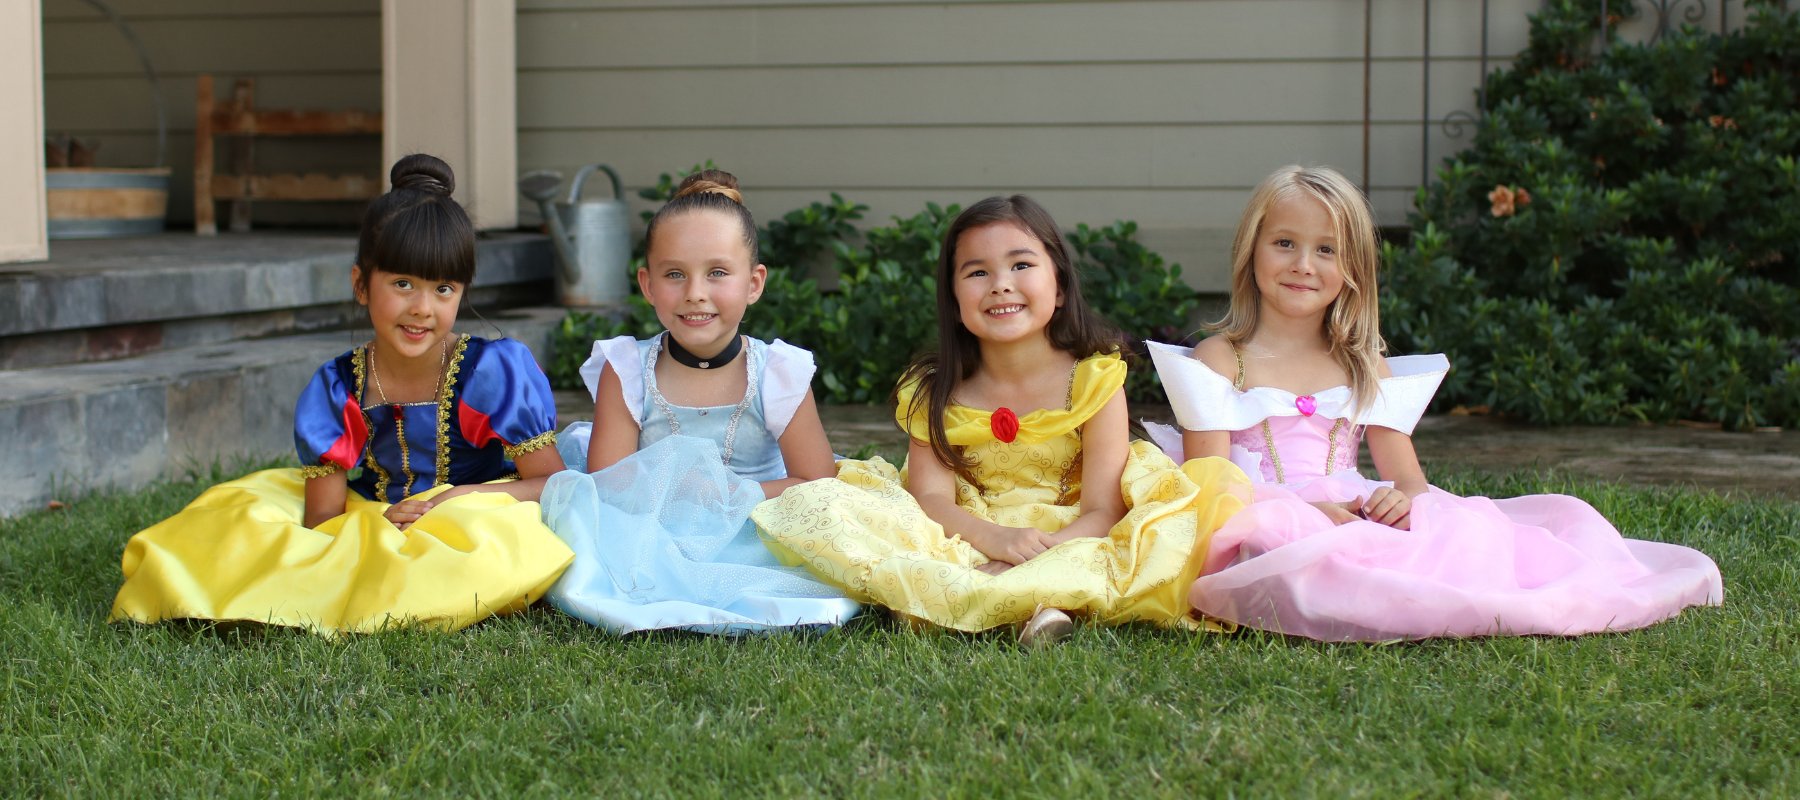 Disney Princess Costumes for Adults & Kids